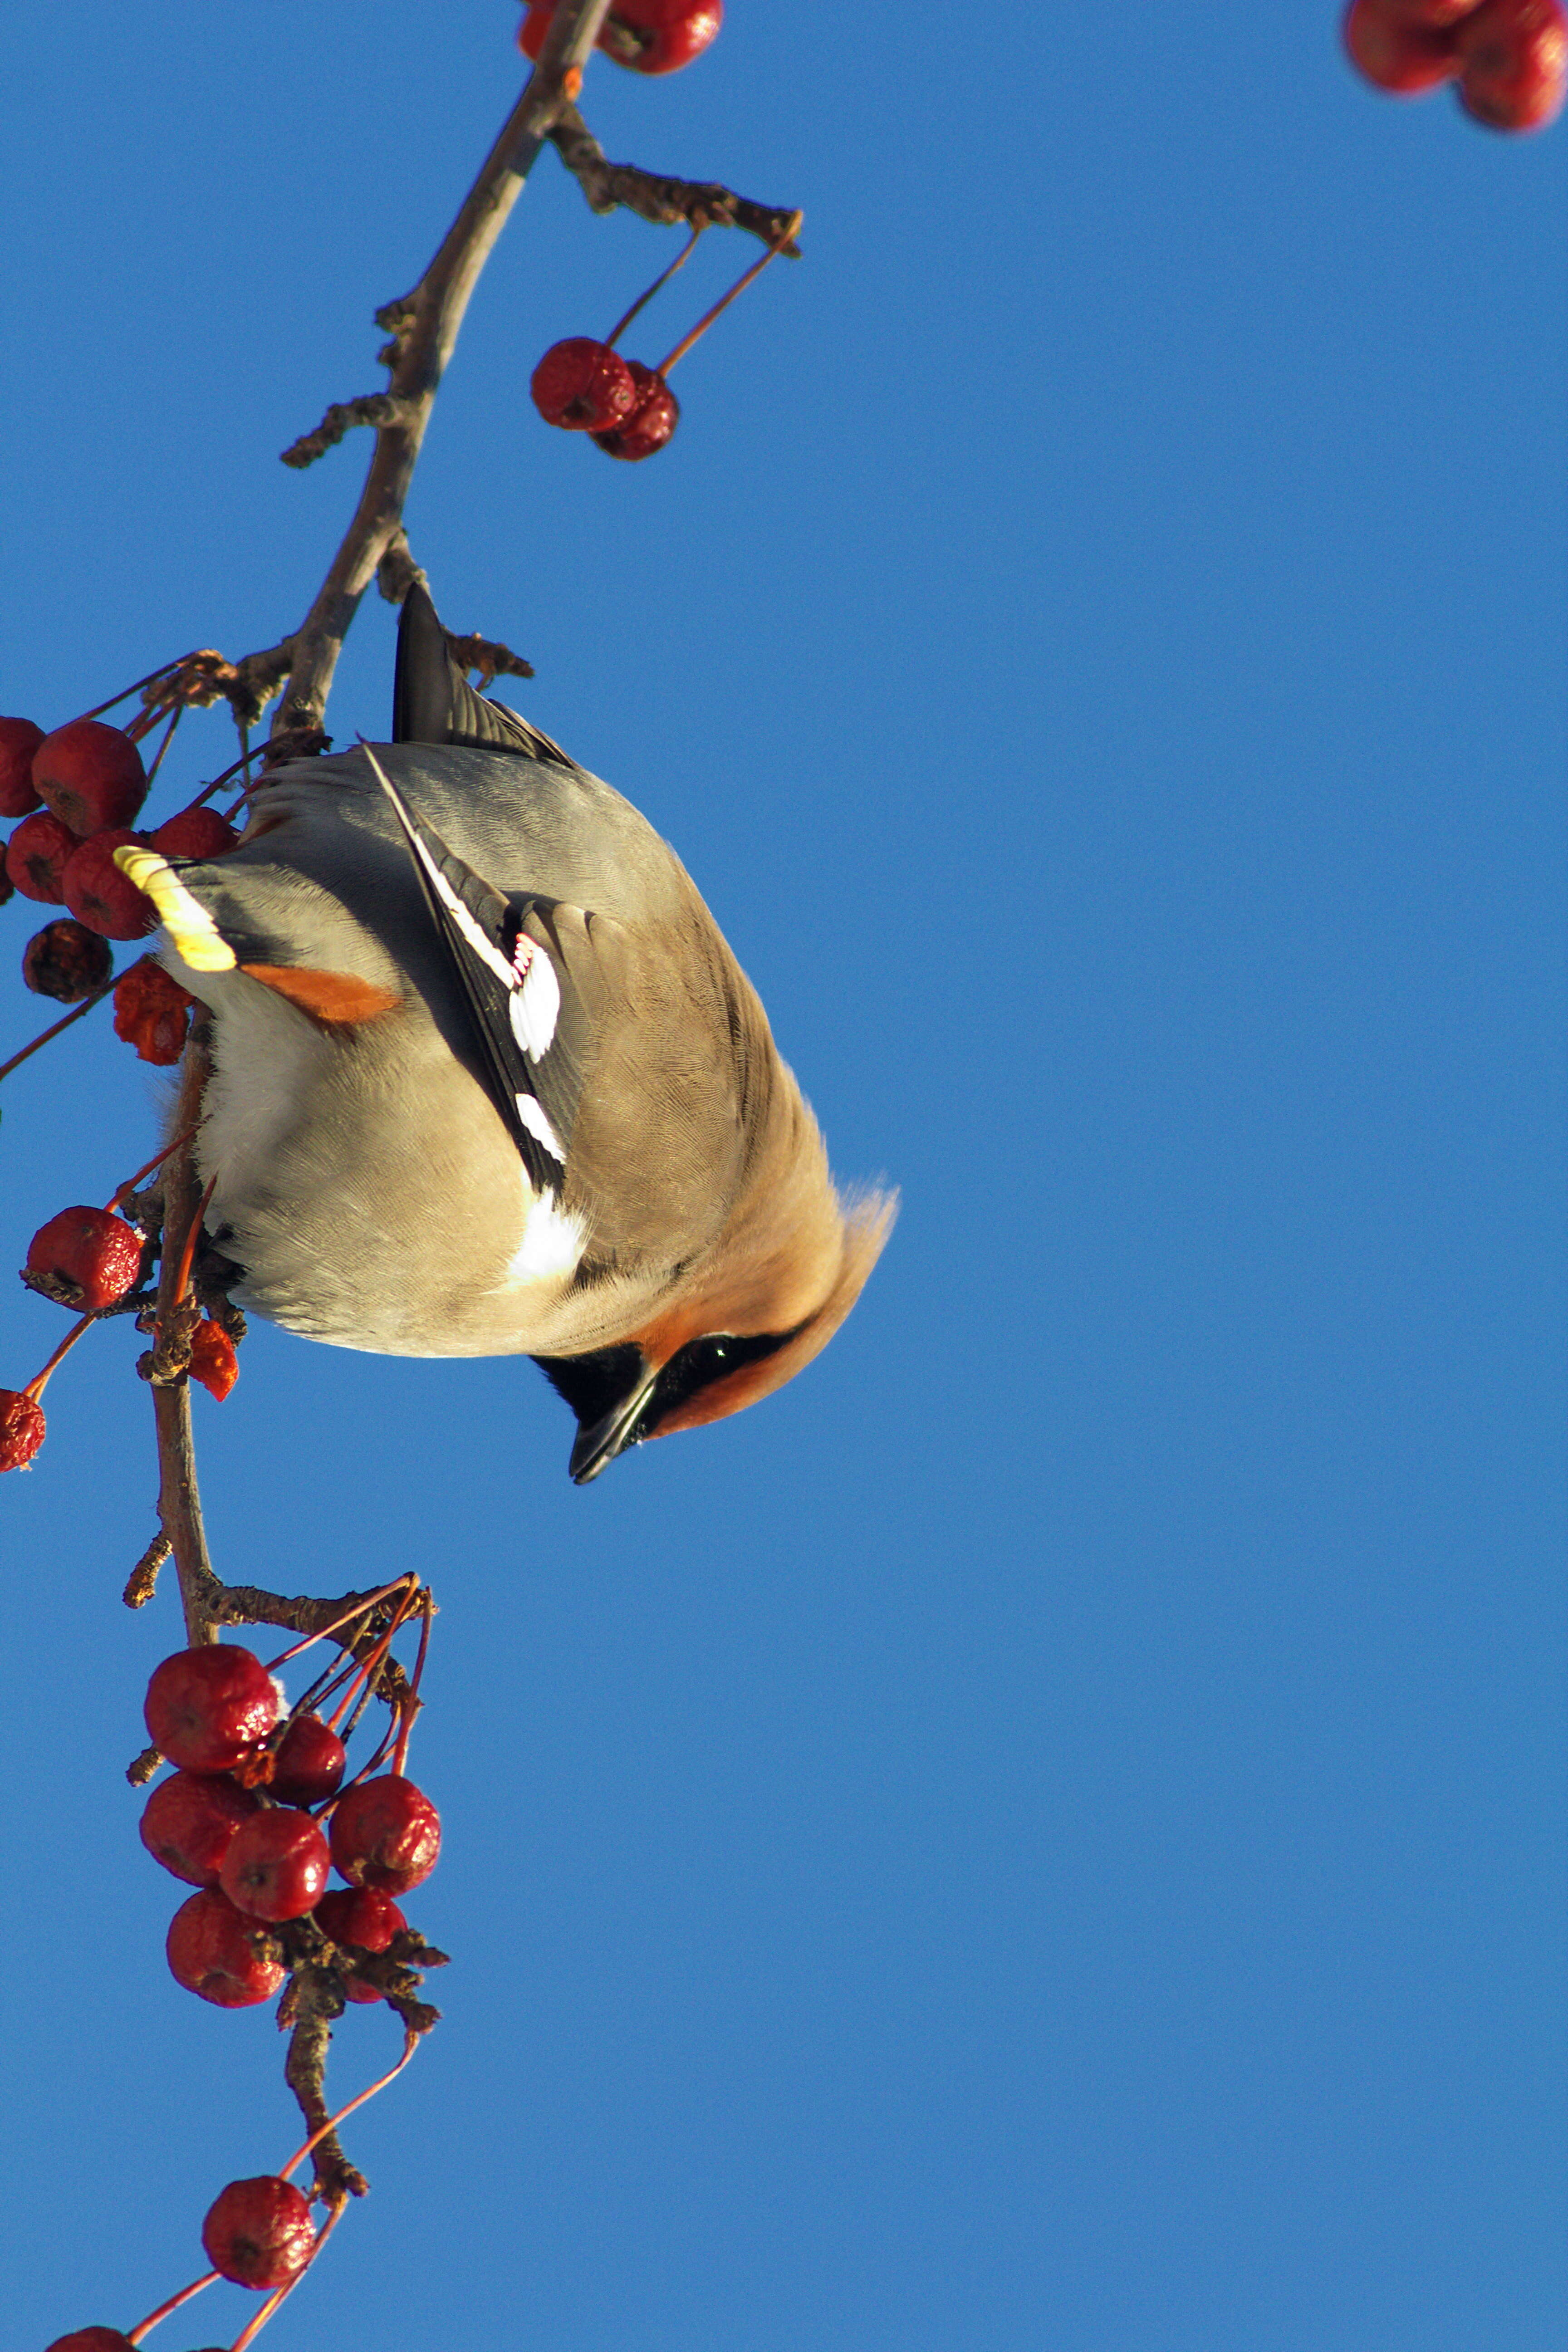 Image of waxwings and relatives